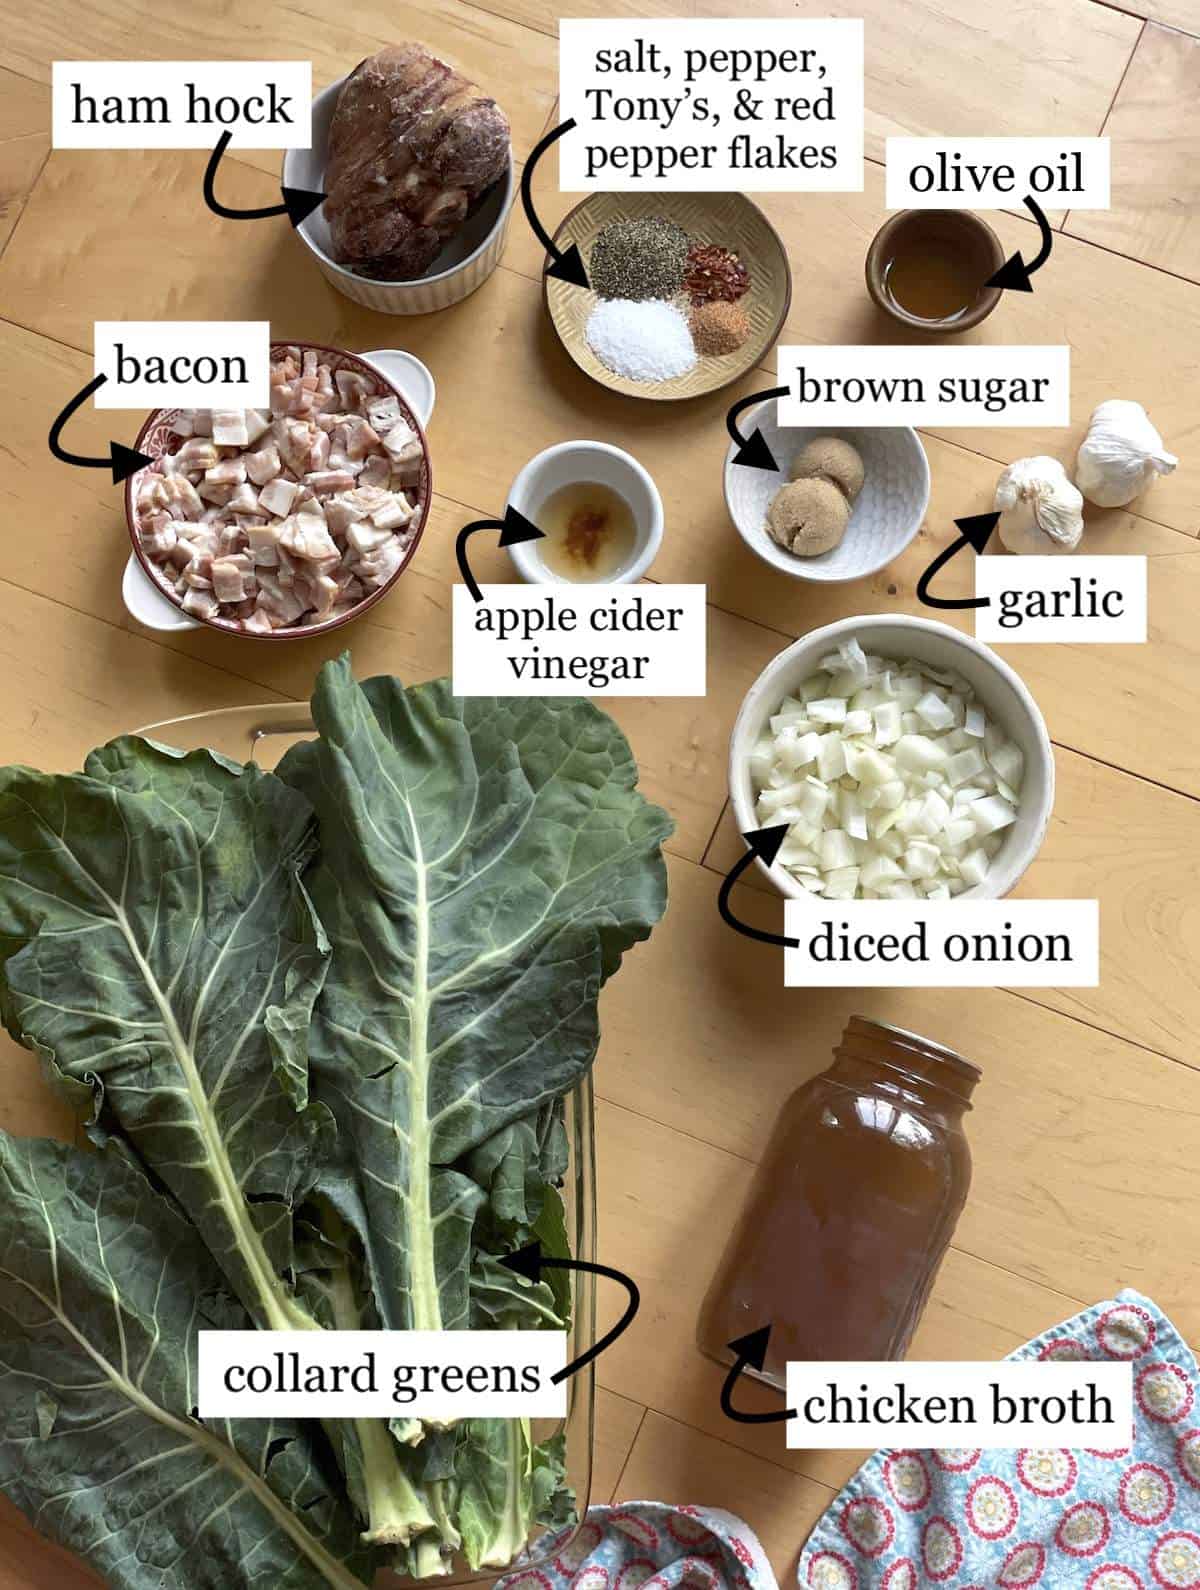 The ingredients needed to make collard greens, laid out and labeled.